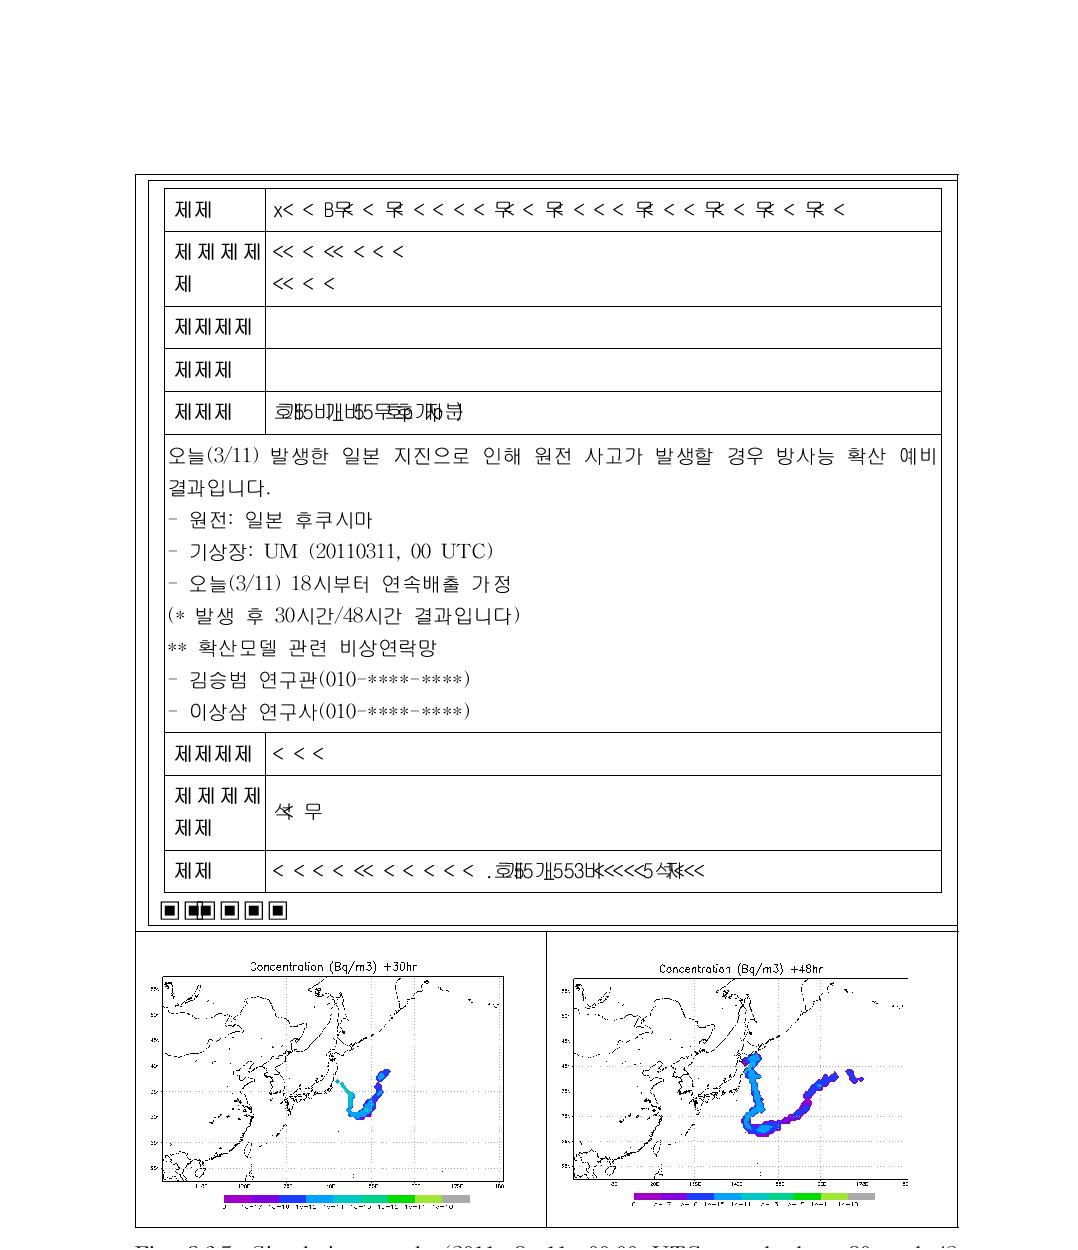 Simulation result (2011. 3. 11. 00:00 UTC standard at 30 and 48 hours) and related report.